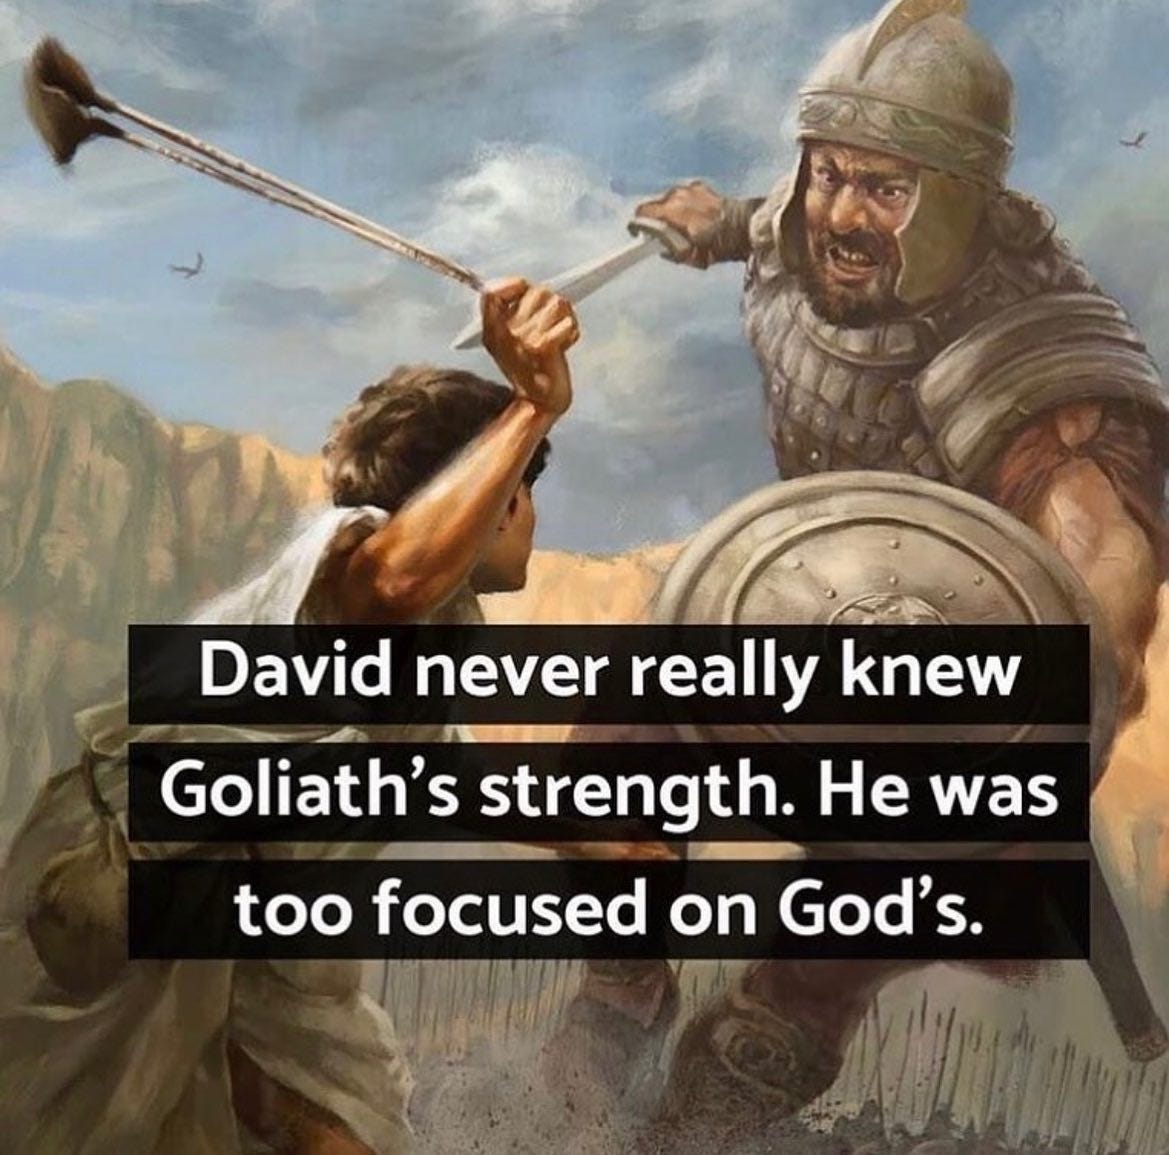 May be an image of 1 person and text that says 'David never really knew Goliath's strength. He was too focused on God's.'